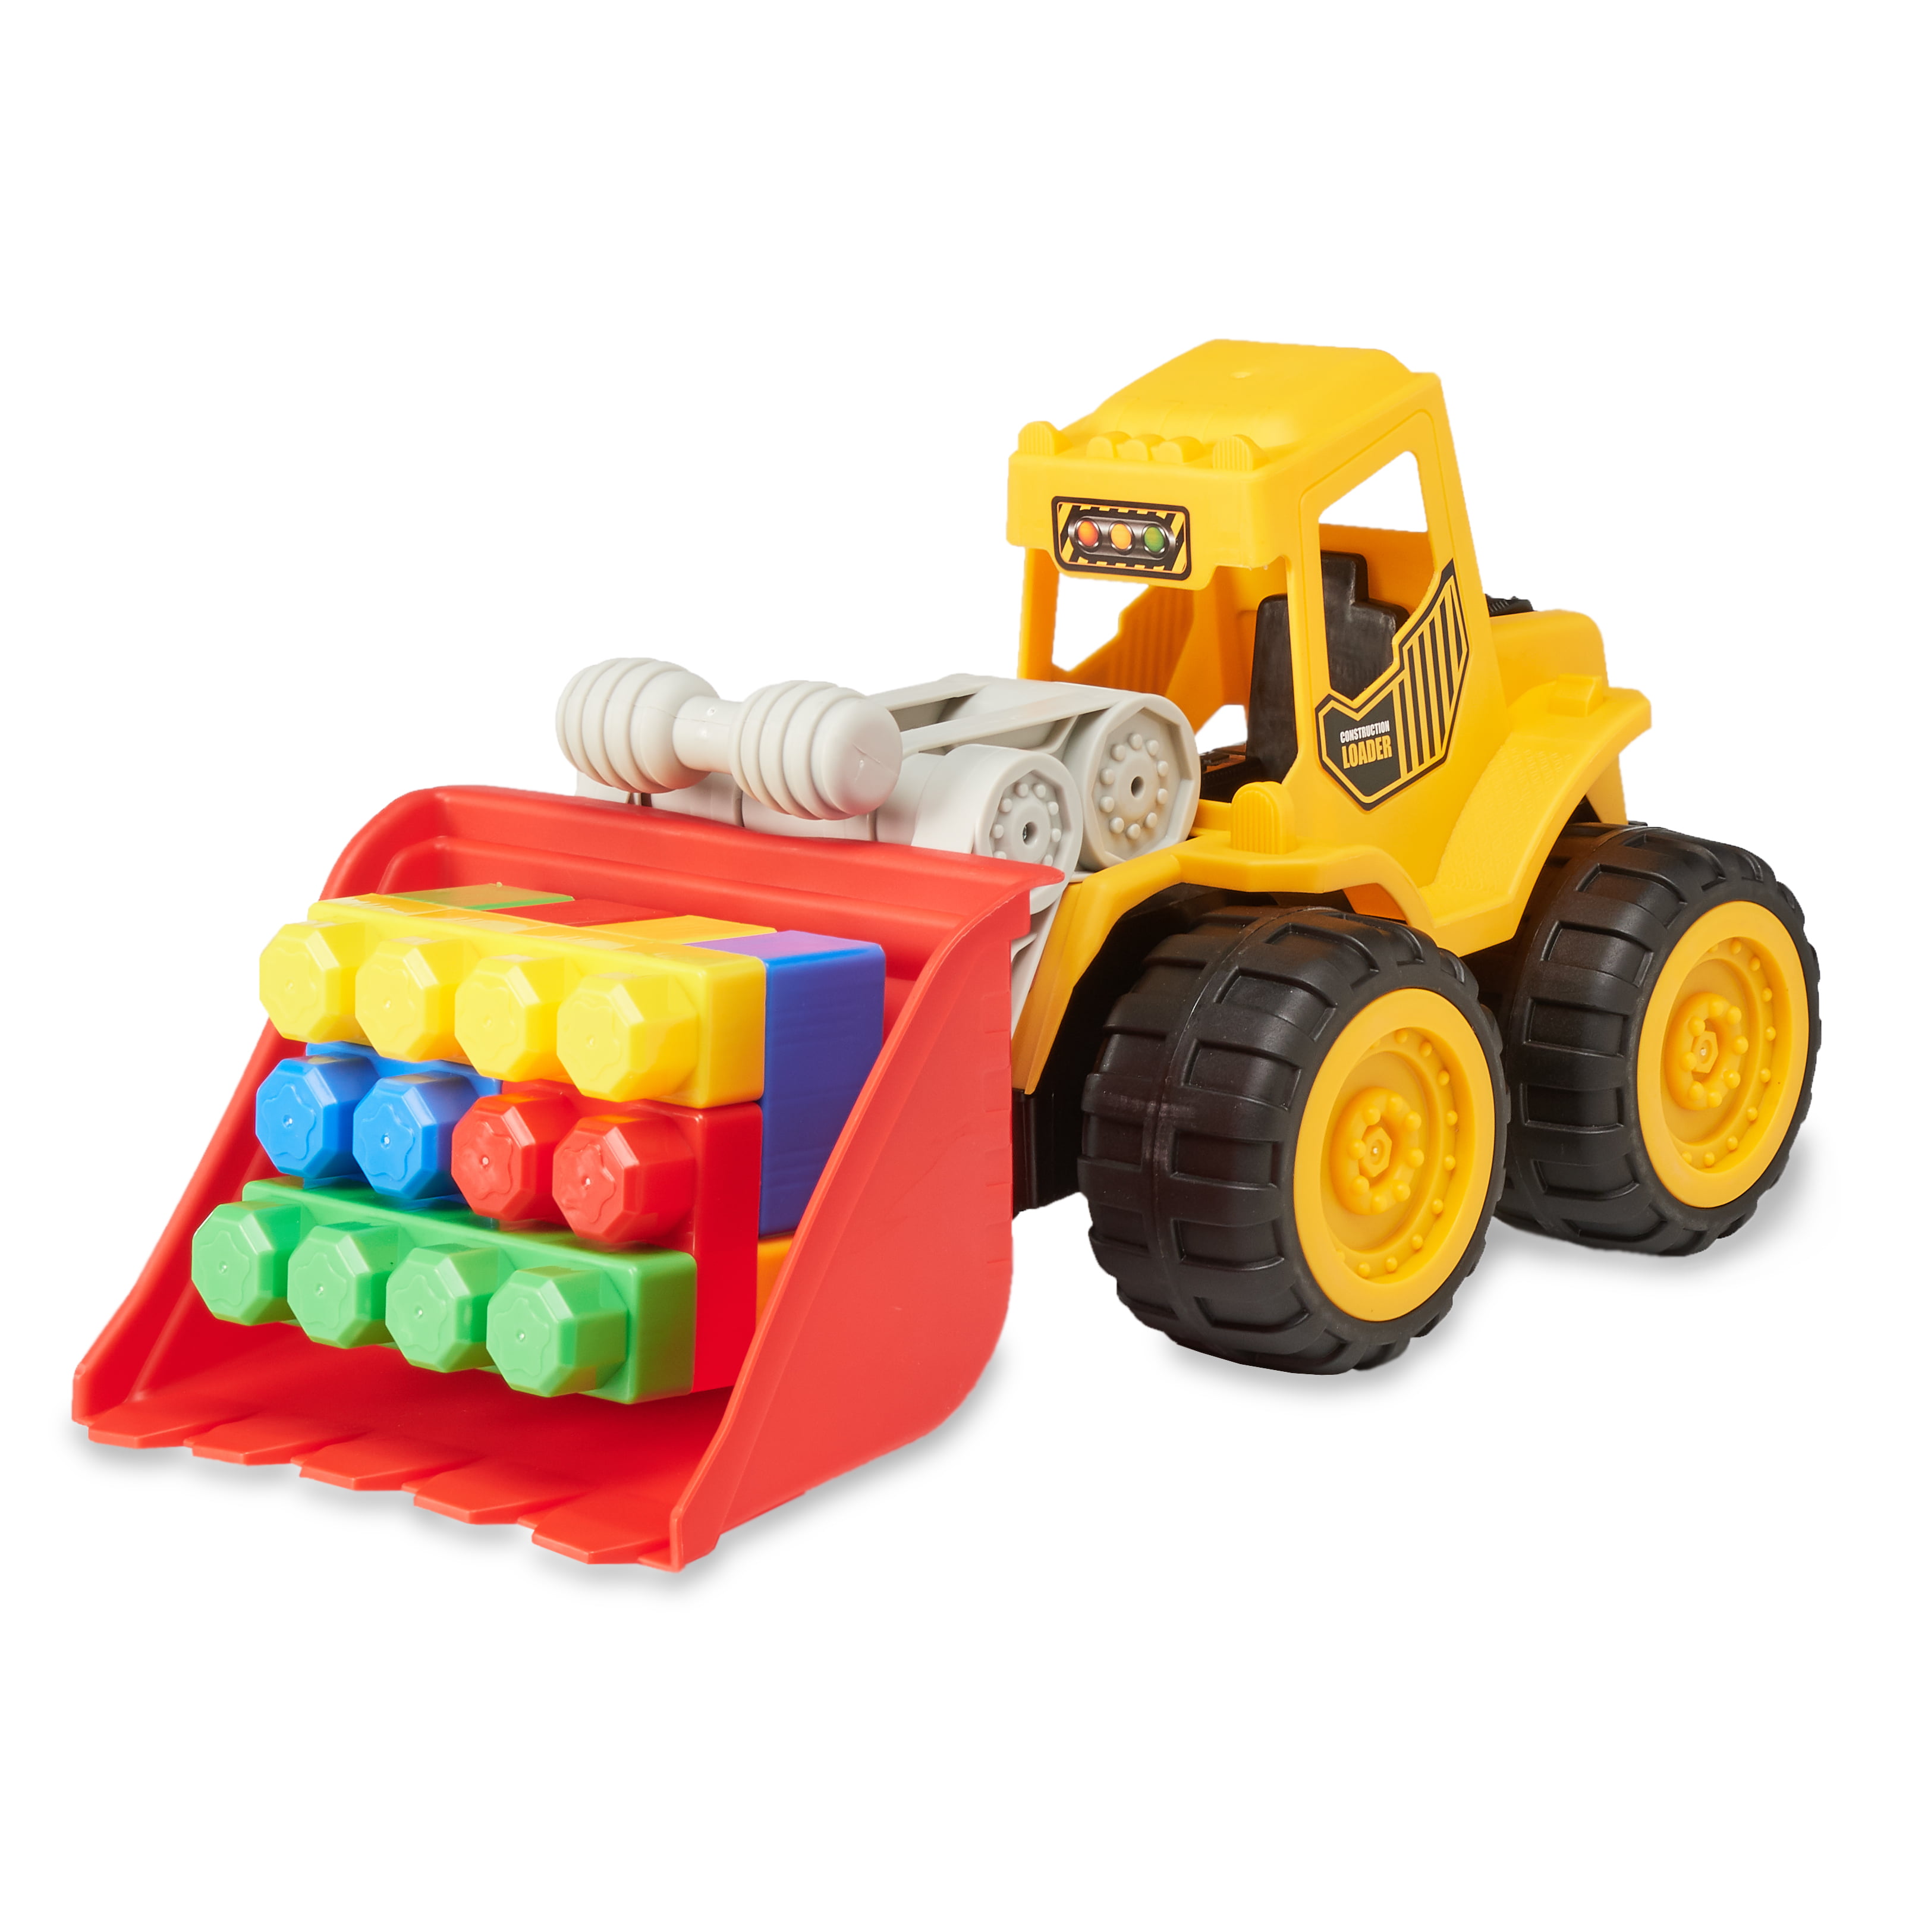 kid connection construction truck with blocks